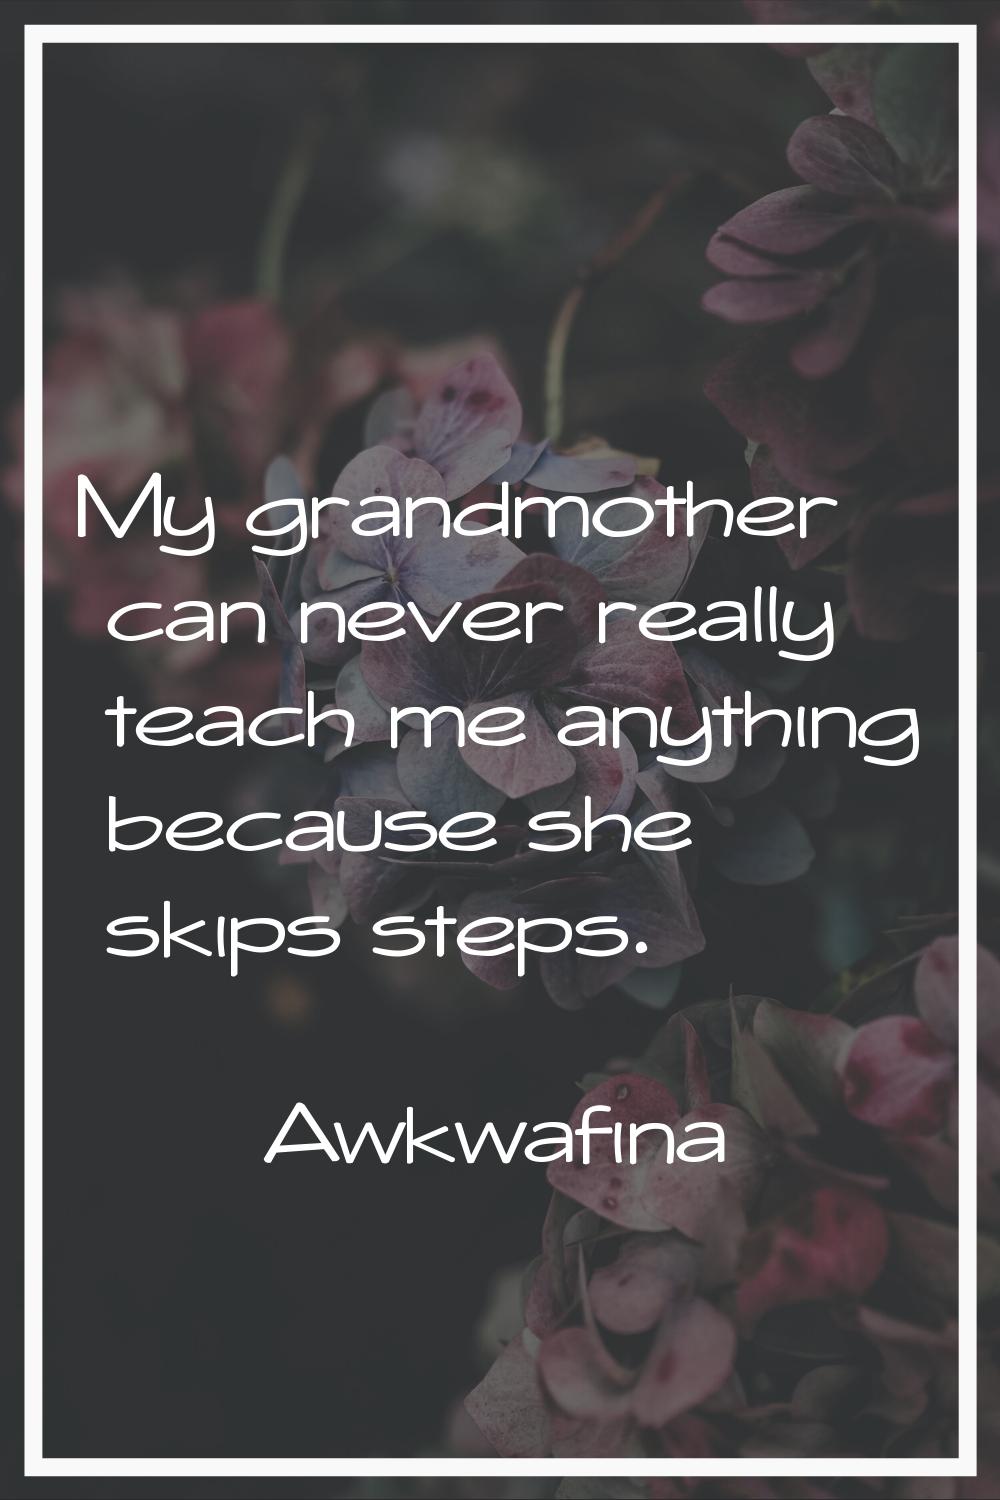 My grandmother can never really teach me anything because she skips steps.